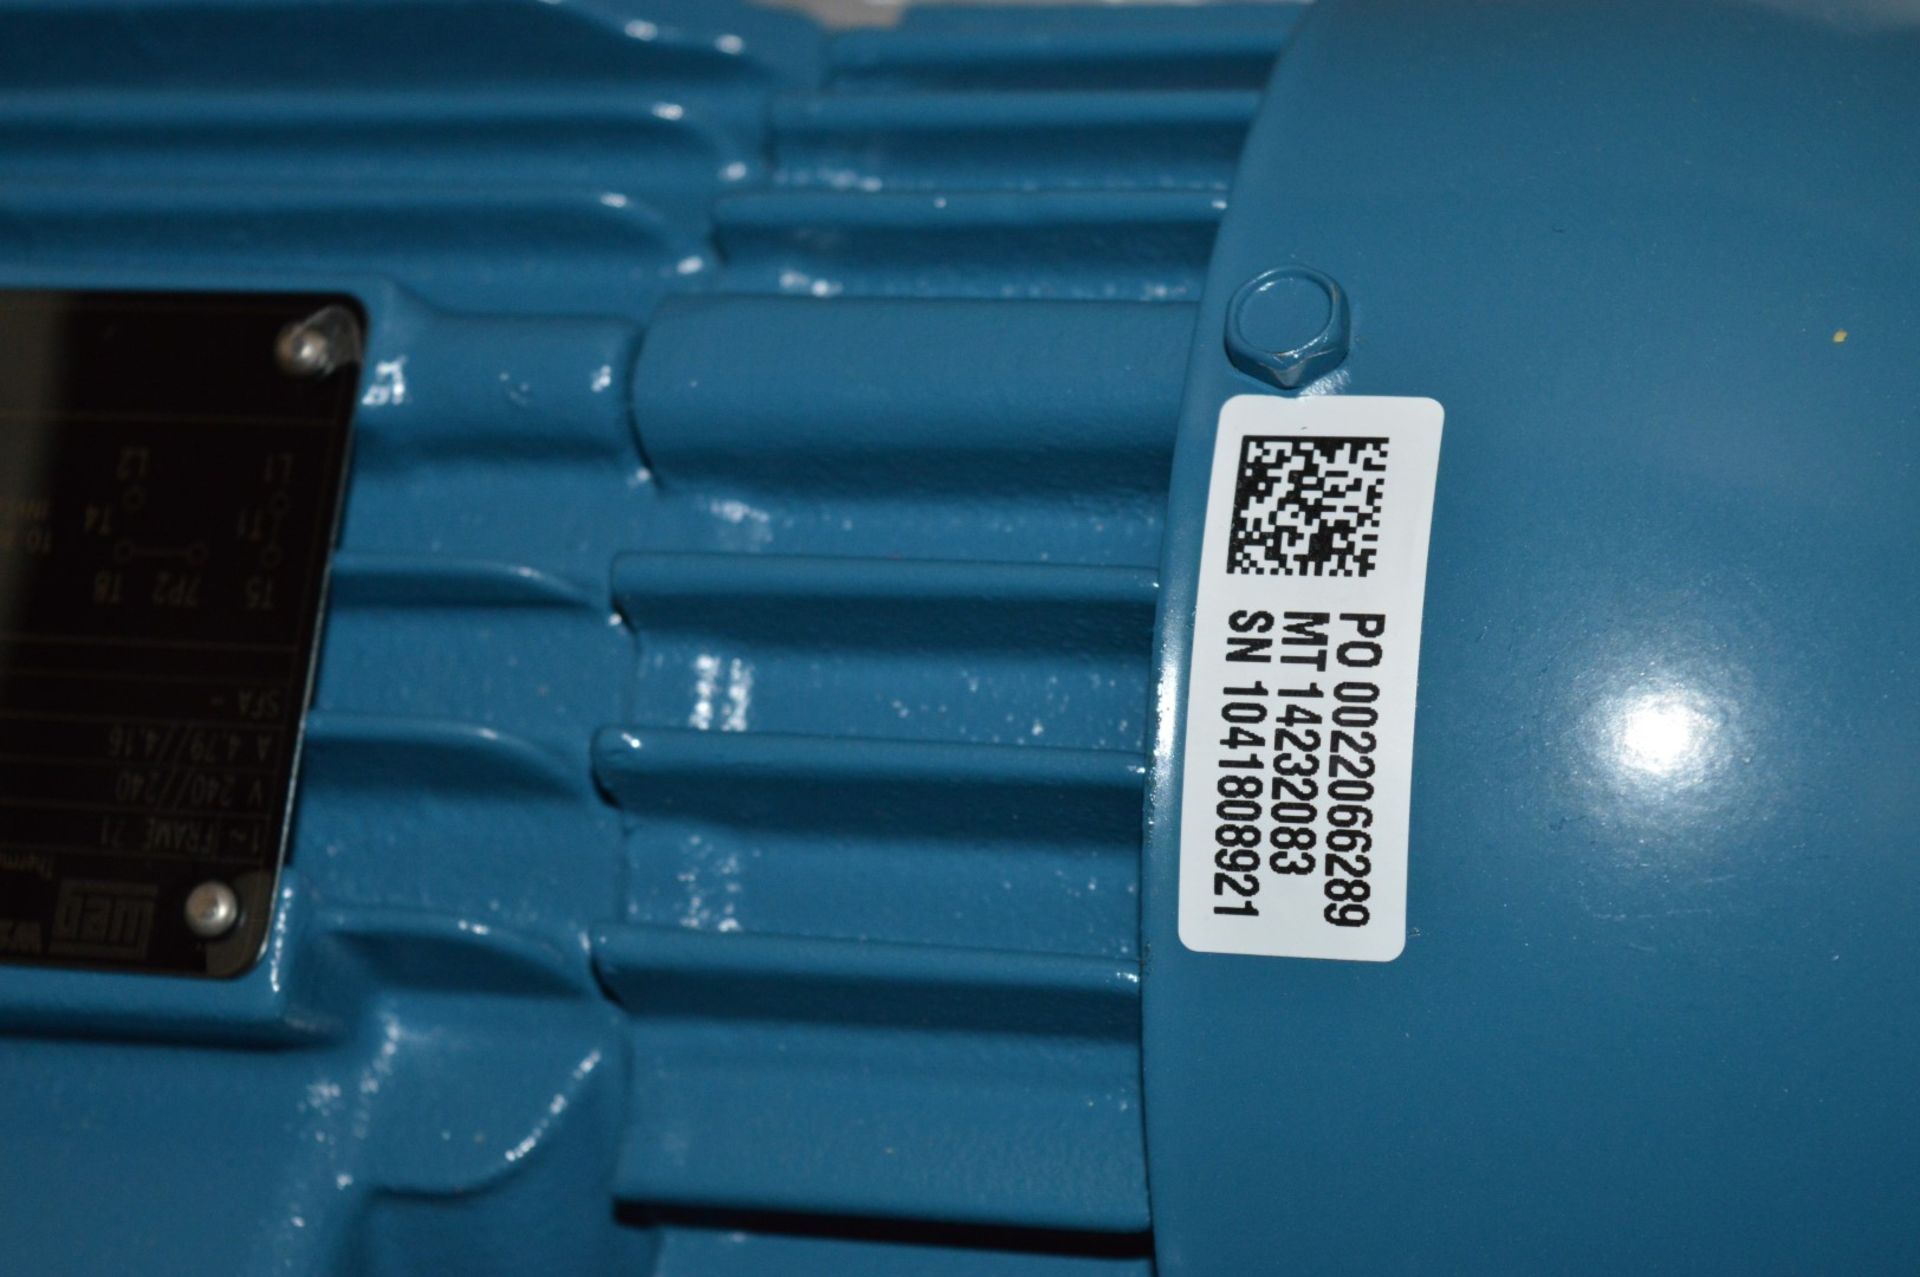 1 x Weg W22 240v IP55 Single Phase Electric Motor - New and Boxed - CL295 - Location: Altrincham - Image 4 of 8